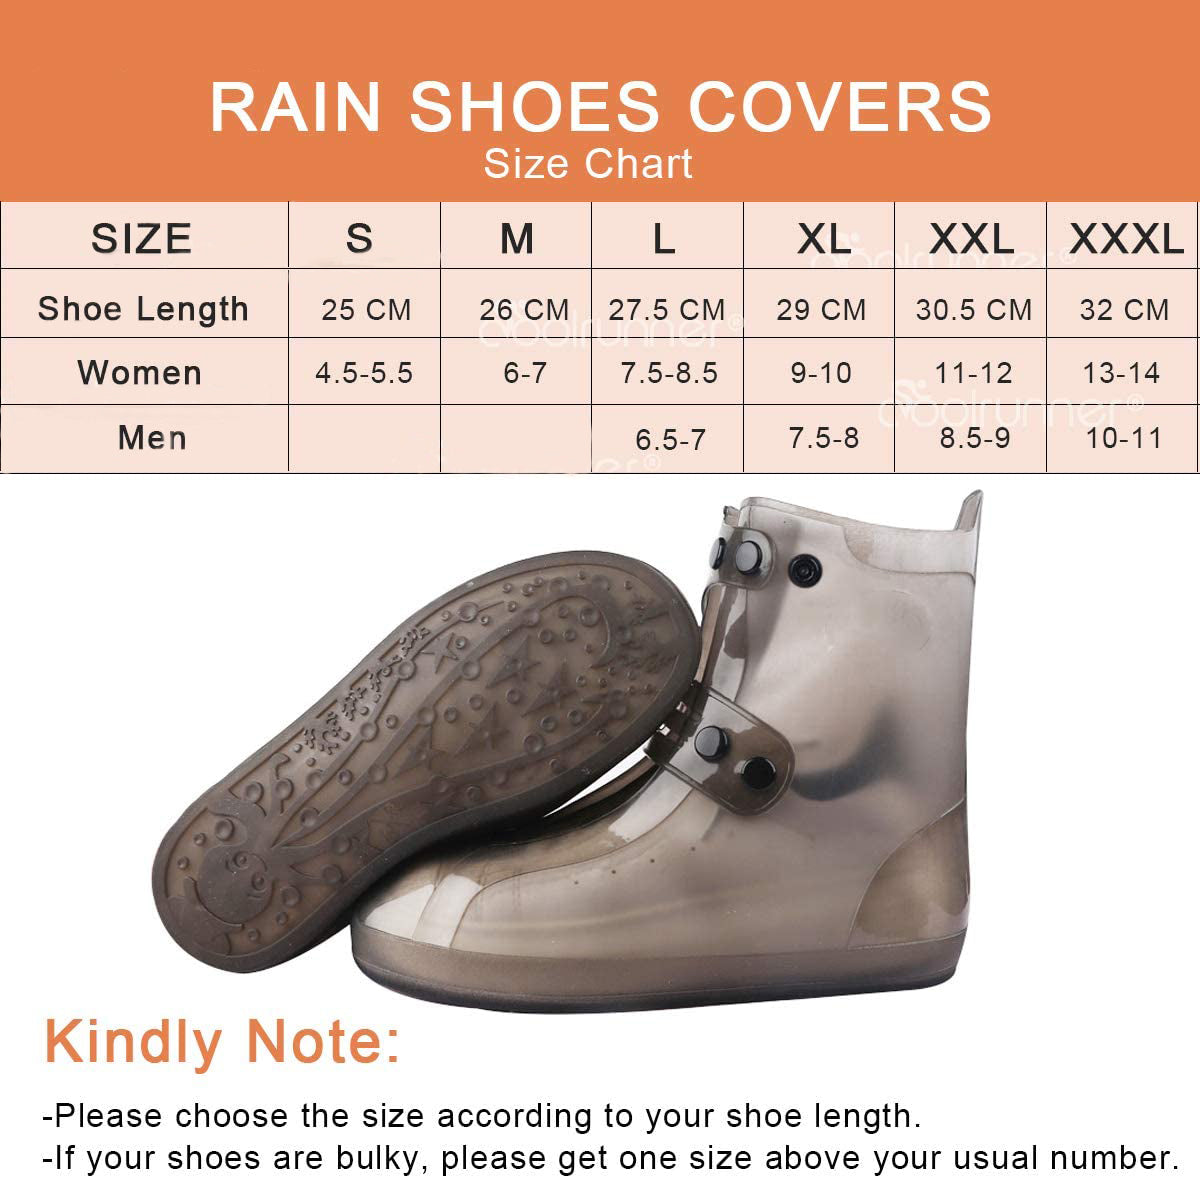 Waterproof Shoe Covers, Non-Slip Water Resistant Overshoes, Rain Boot Shoe Cover Reusable and Foldable Durable for Men Women Kids Outdoor